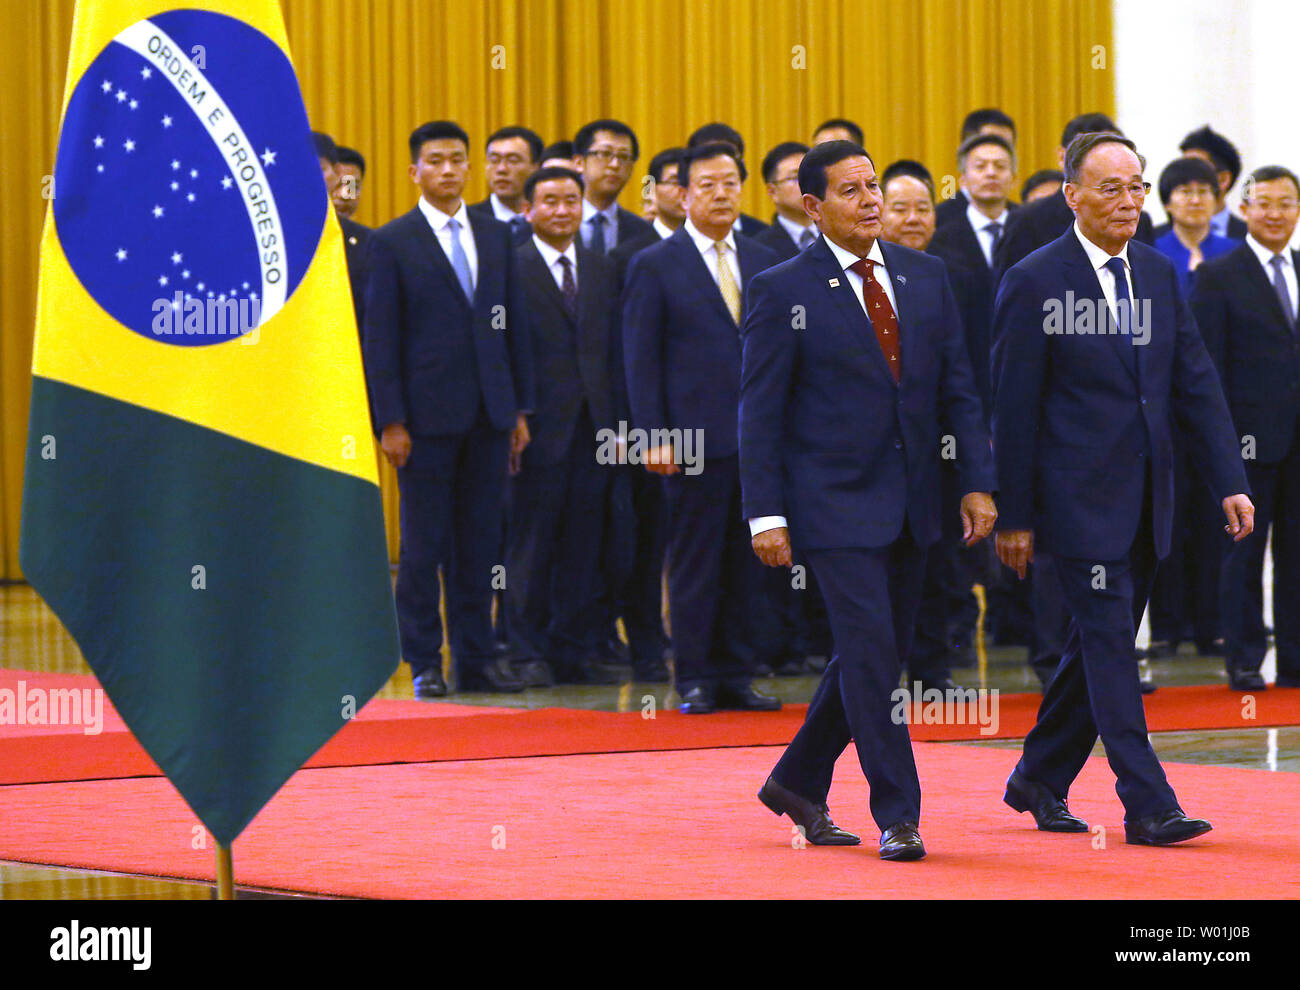 Brazilian Vice-President Hamilton Mourao (L) is escorted by Chinese Vice-President Wang Qishan to a welcoming ceremony in the Great Hall of the People in Beijing on May 23, 2019.  Mourao is on a five-day state visit to China's capital in hopes of patching up wounds caused by Brazilian President Jair Bolsonaro's abrasive anti-China rhetoric.      Photo by Stephen Shaver/UPI Stock Photo